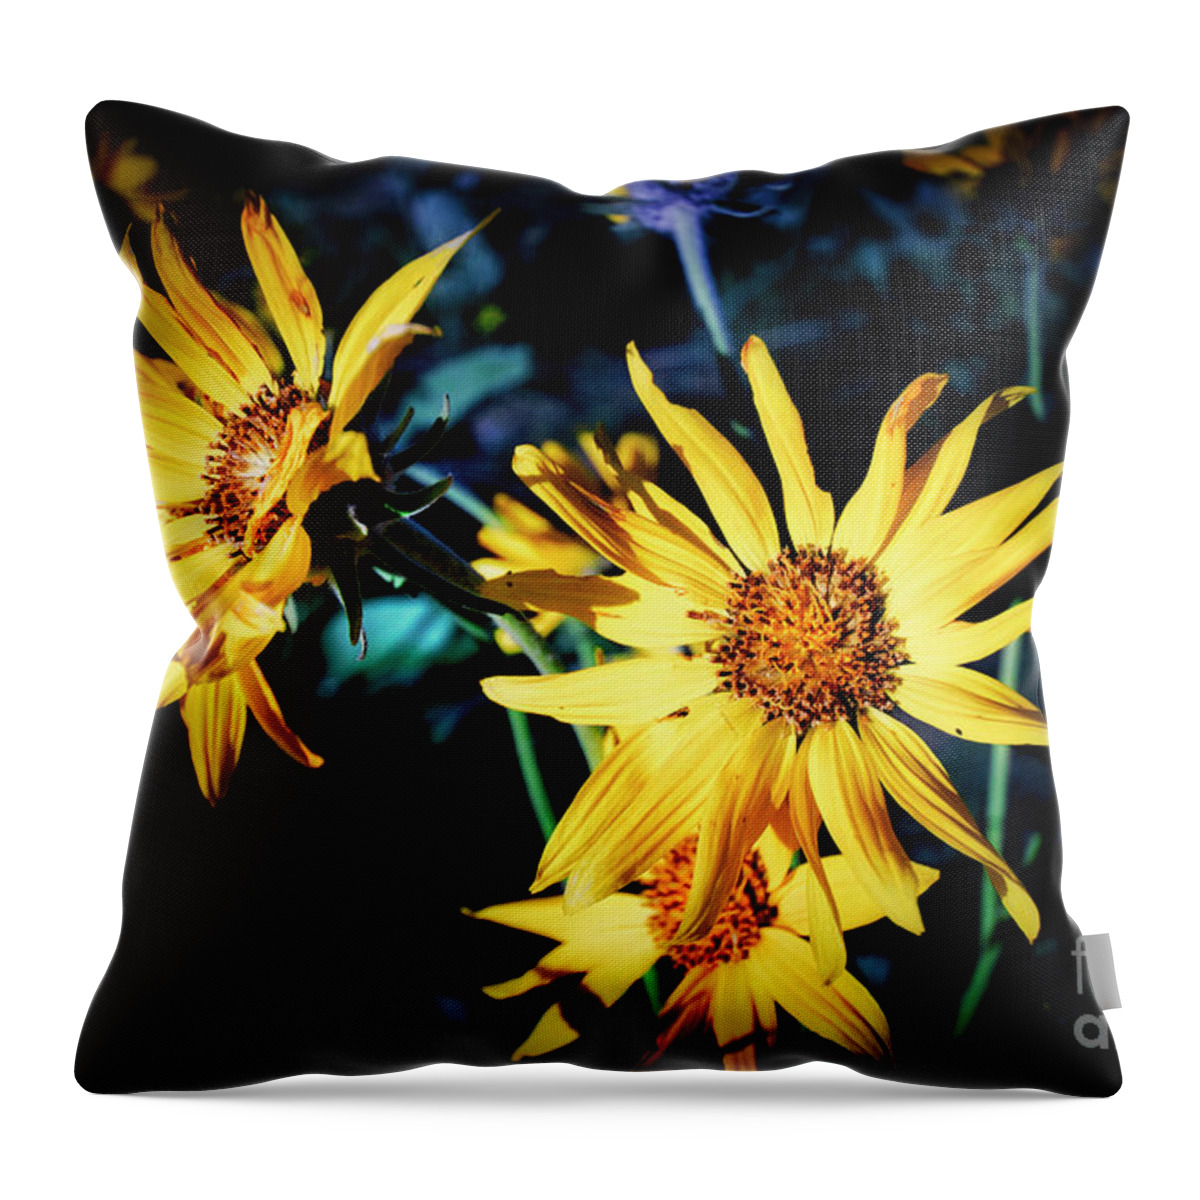 Sunflower Throw Pillow featuring the photograph Sunflower by Thomas Nay